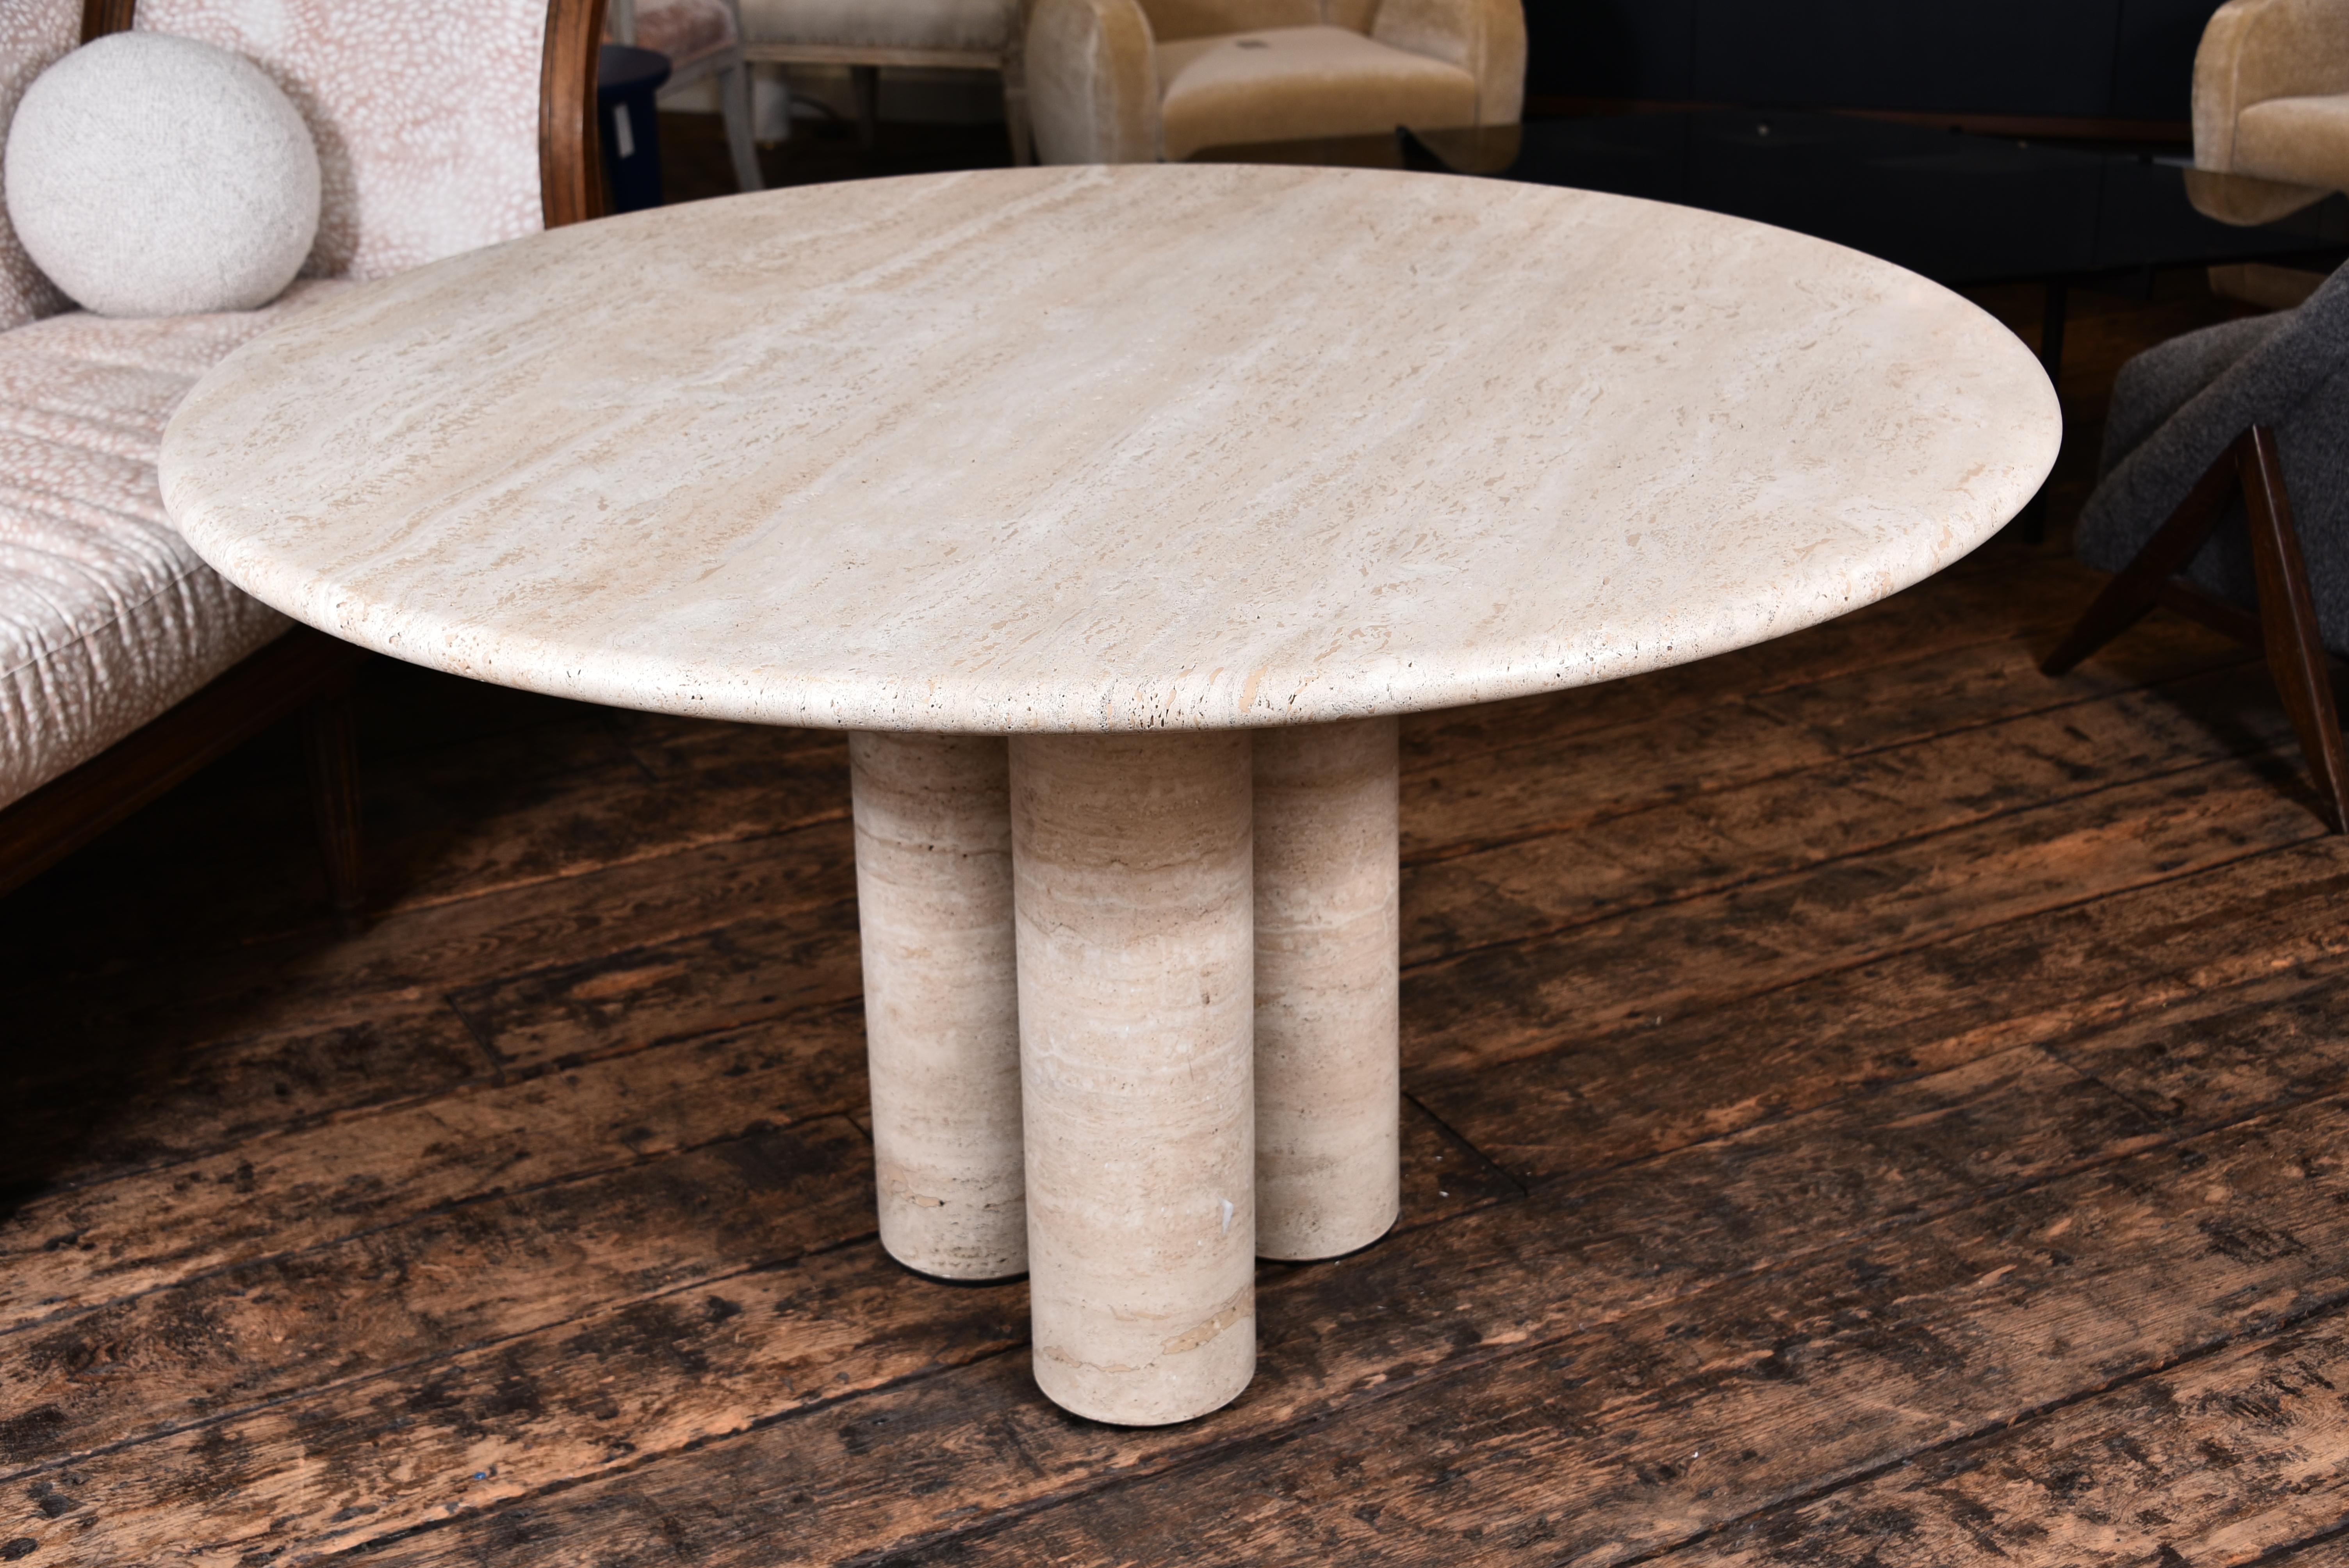 Vintage travertine table. 1970s and in great condition.